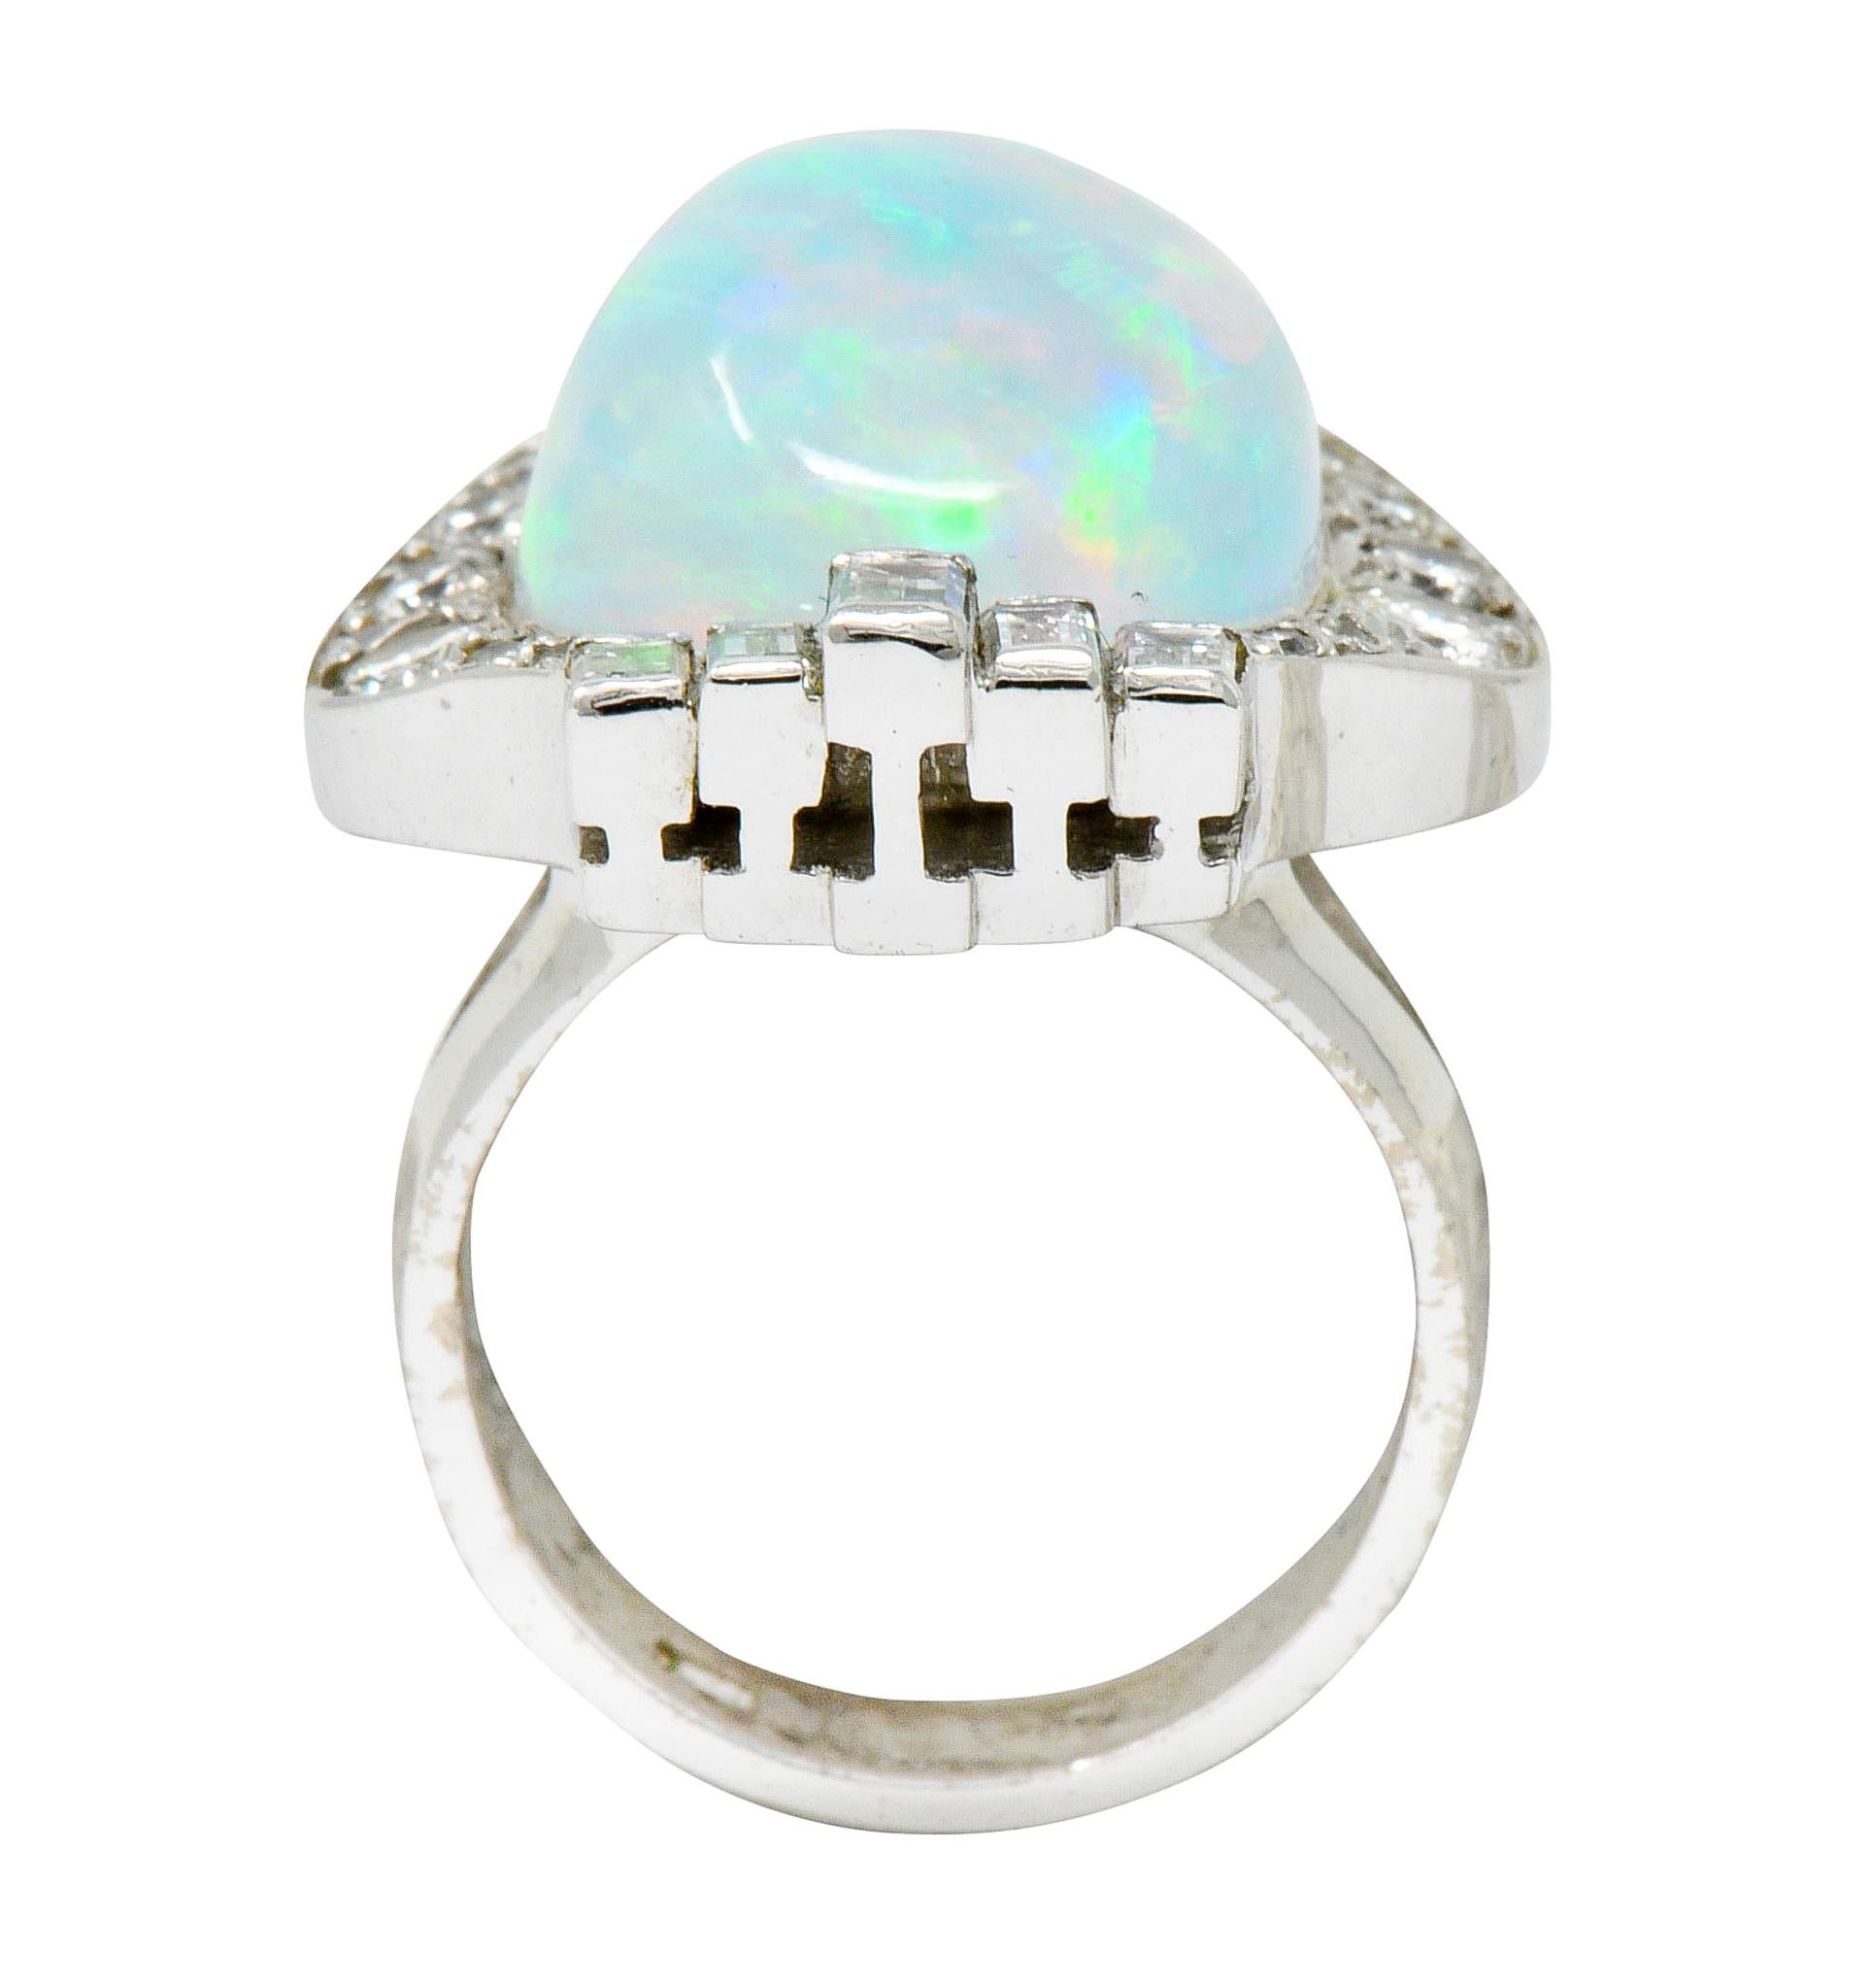 Ethereal Opal Cabochon Diamond 14 Karat White Gold Cocktail Ring 3